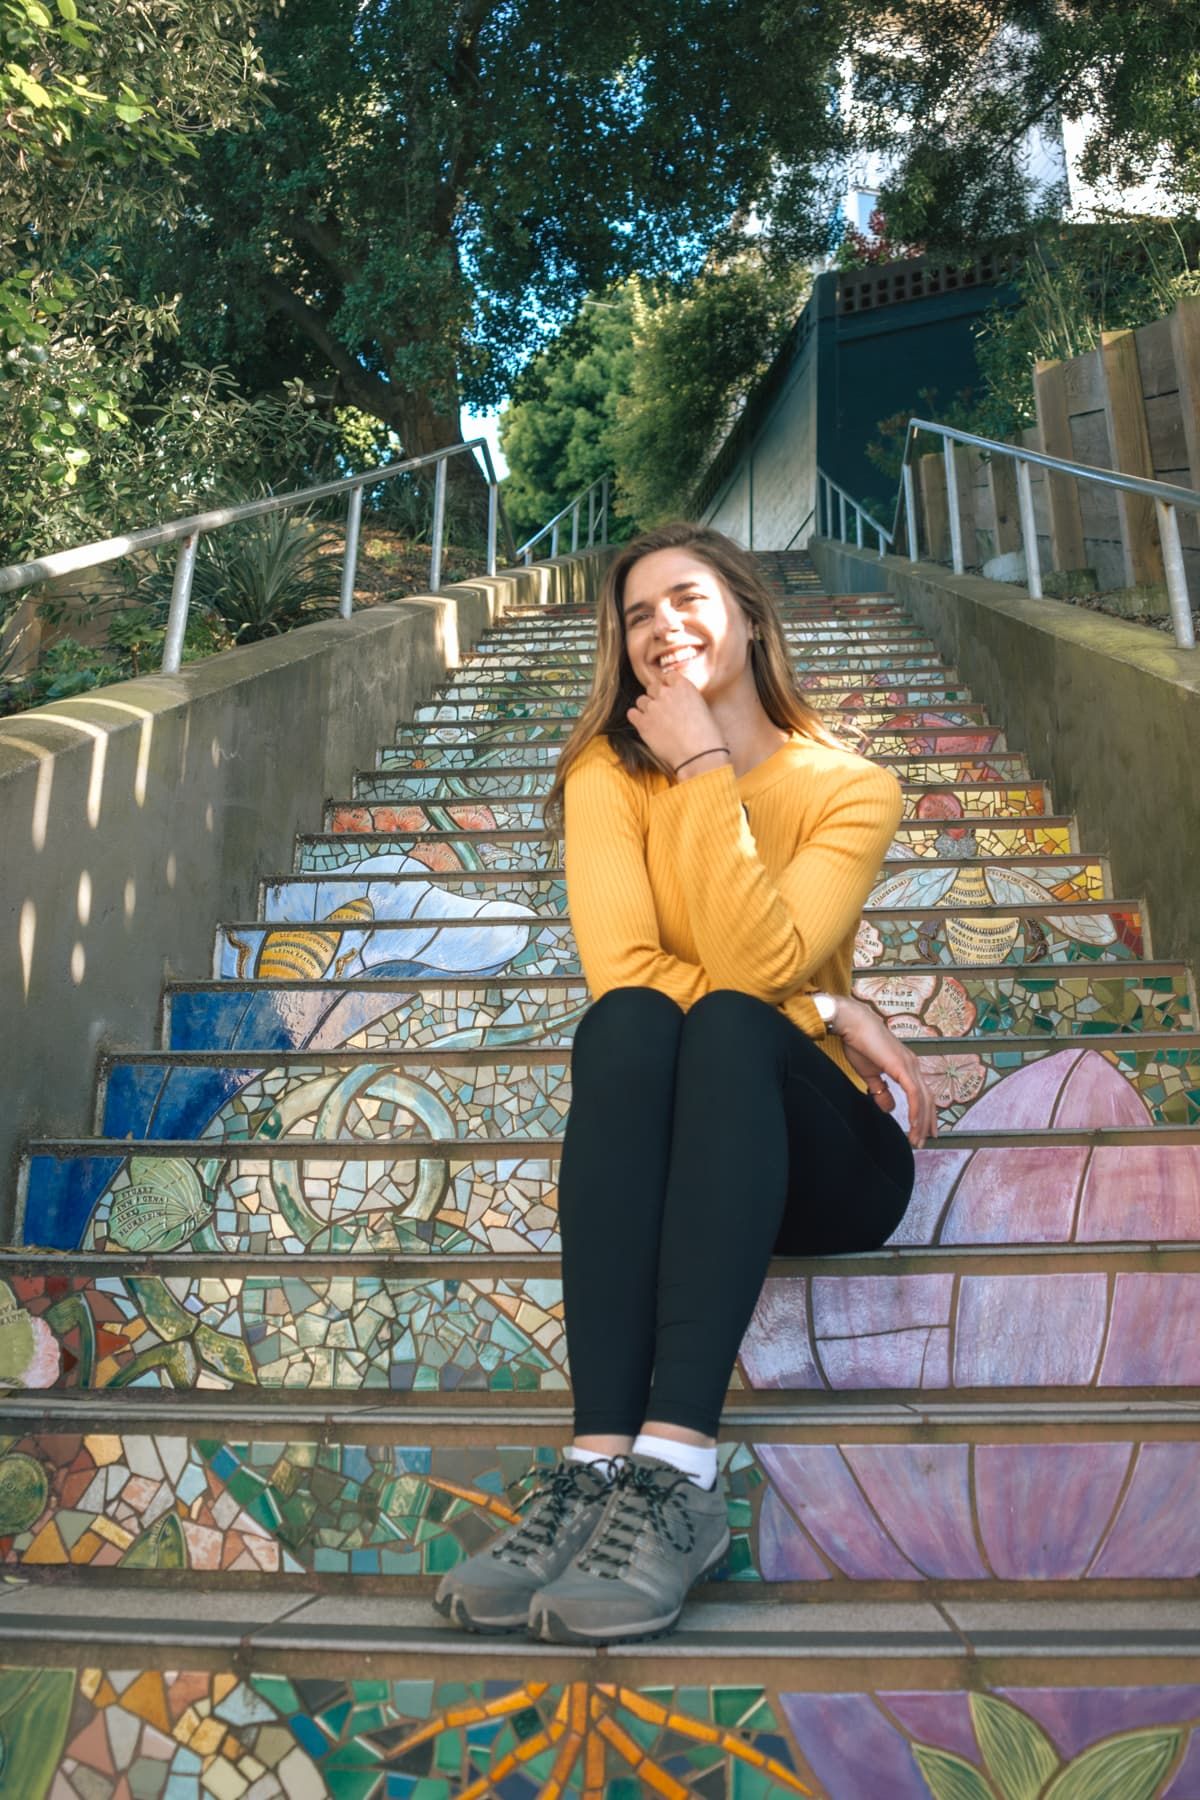 A young light-haired woman in black pants and a yellow shirt smiles at the camera as she sits on a set of stairs decorated with mosaics.